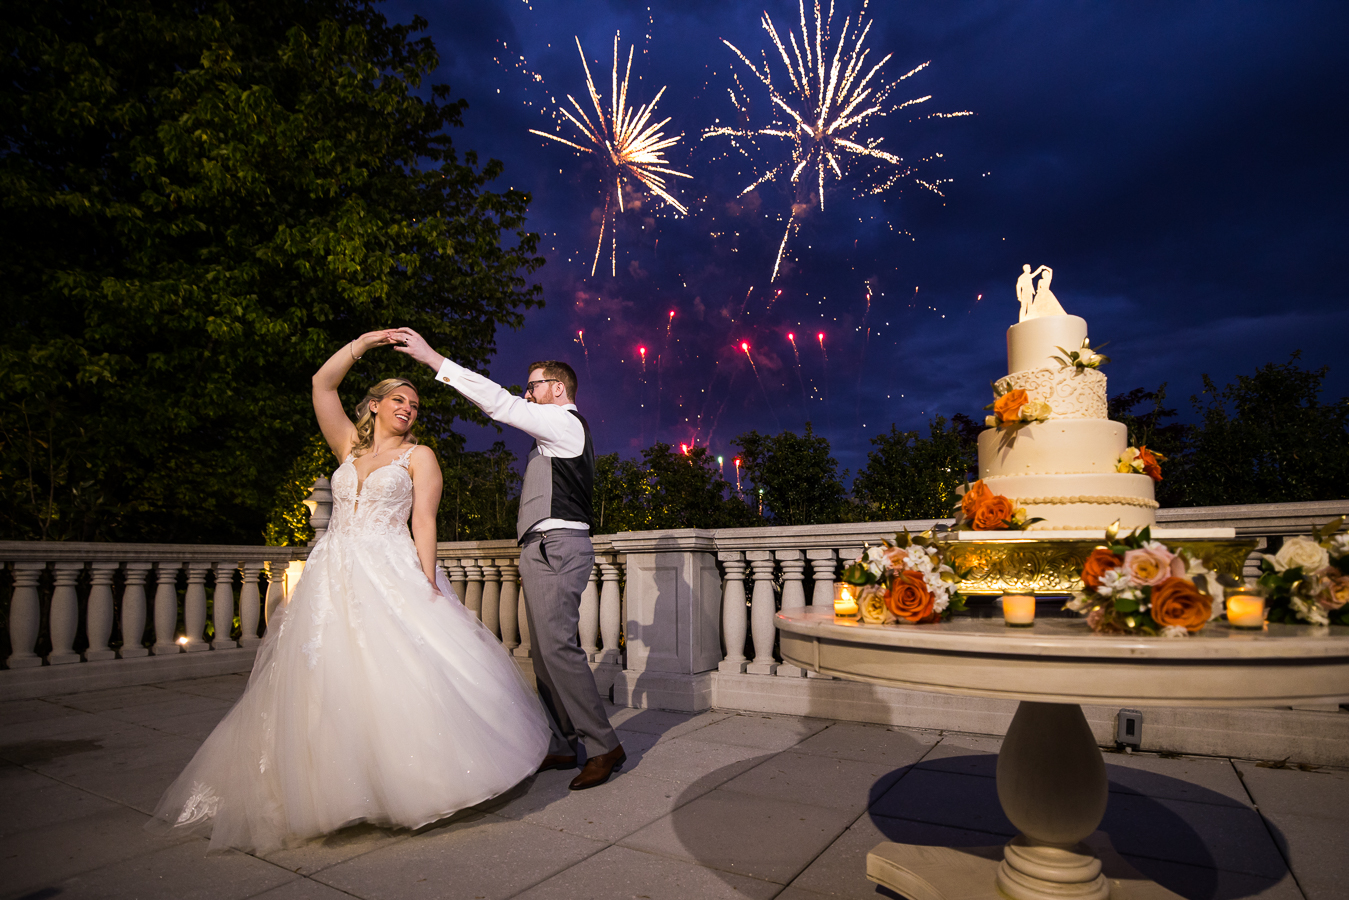 creative NJ Wedding Photographer, lisa rhinehart, captures this fun, vibrant image of the bride and groom as they twirl one another with fireworks in the background during their palace at somerset wedding reception in new jersey 